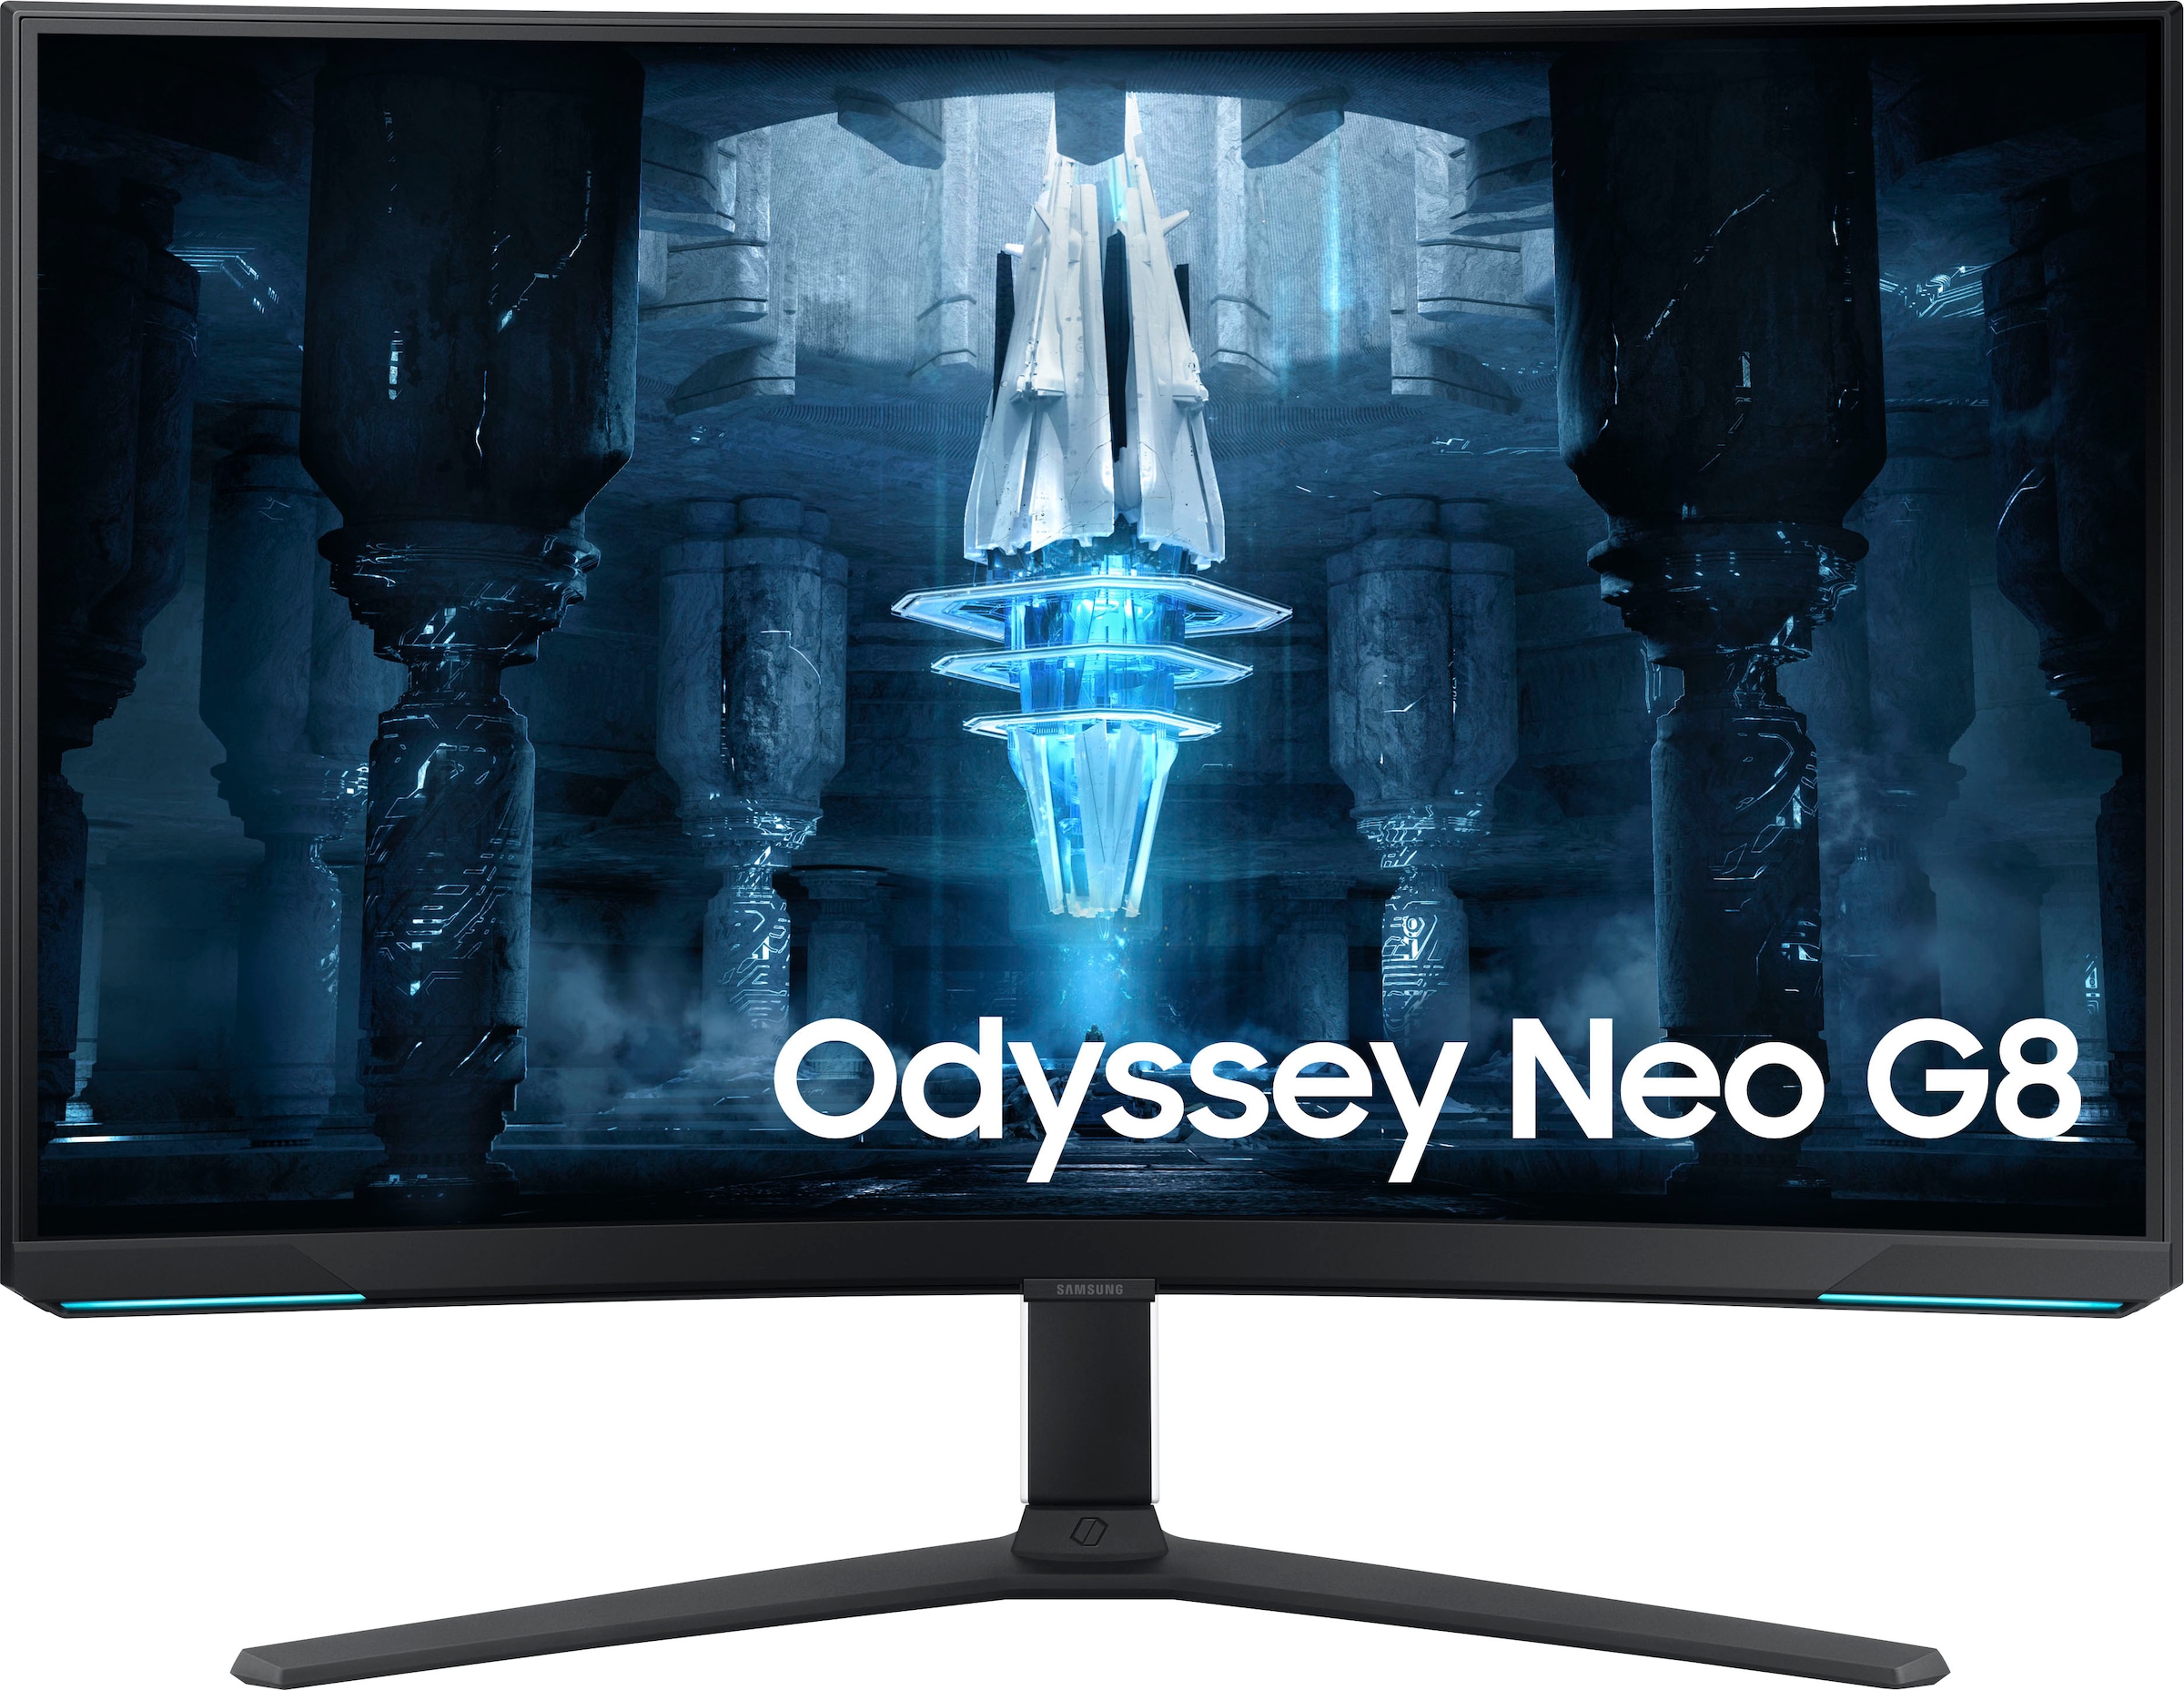 Samsung Curved-Gaming-LED-Monitor cm/32 Zoll, ms 1 »Odyssey 3840 Hz, Ultra 165 4K Reaktionszeit, x 1ms px, HD, 2160 G8 Neo bei S32BG850NP«, OTTO 81 (G/G)